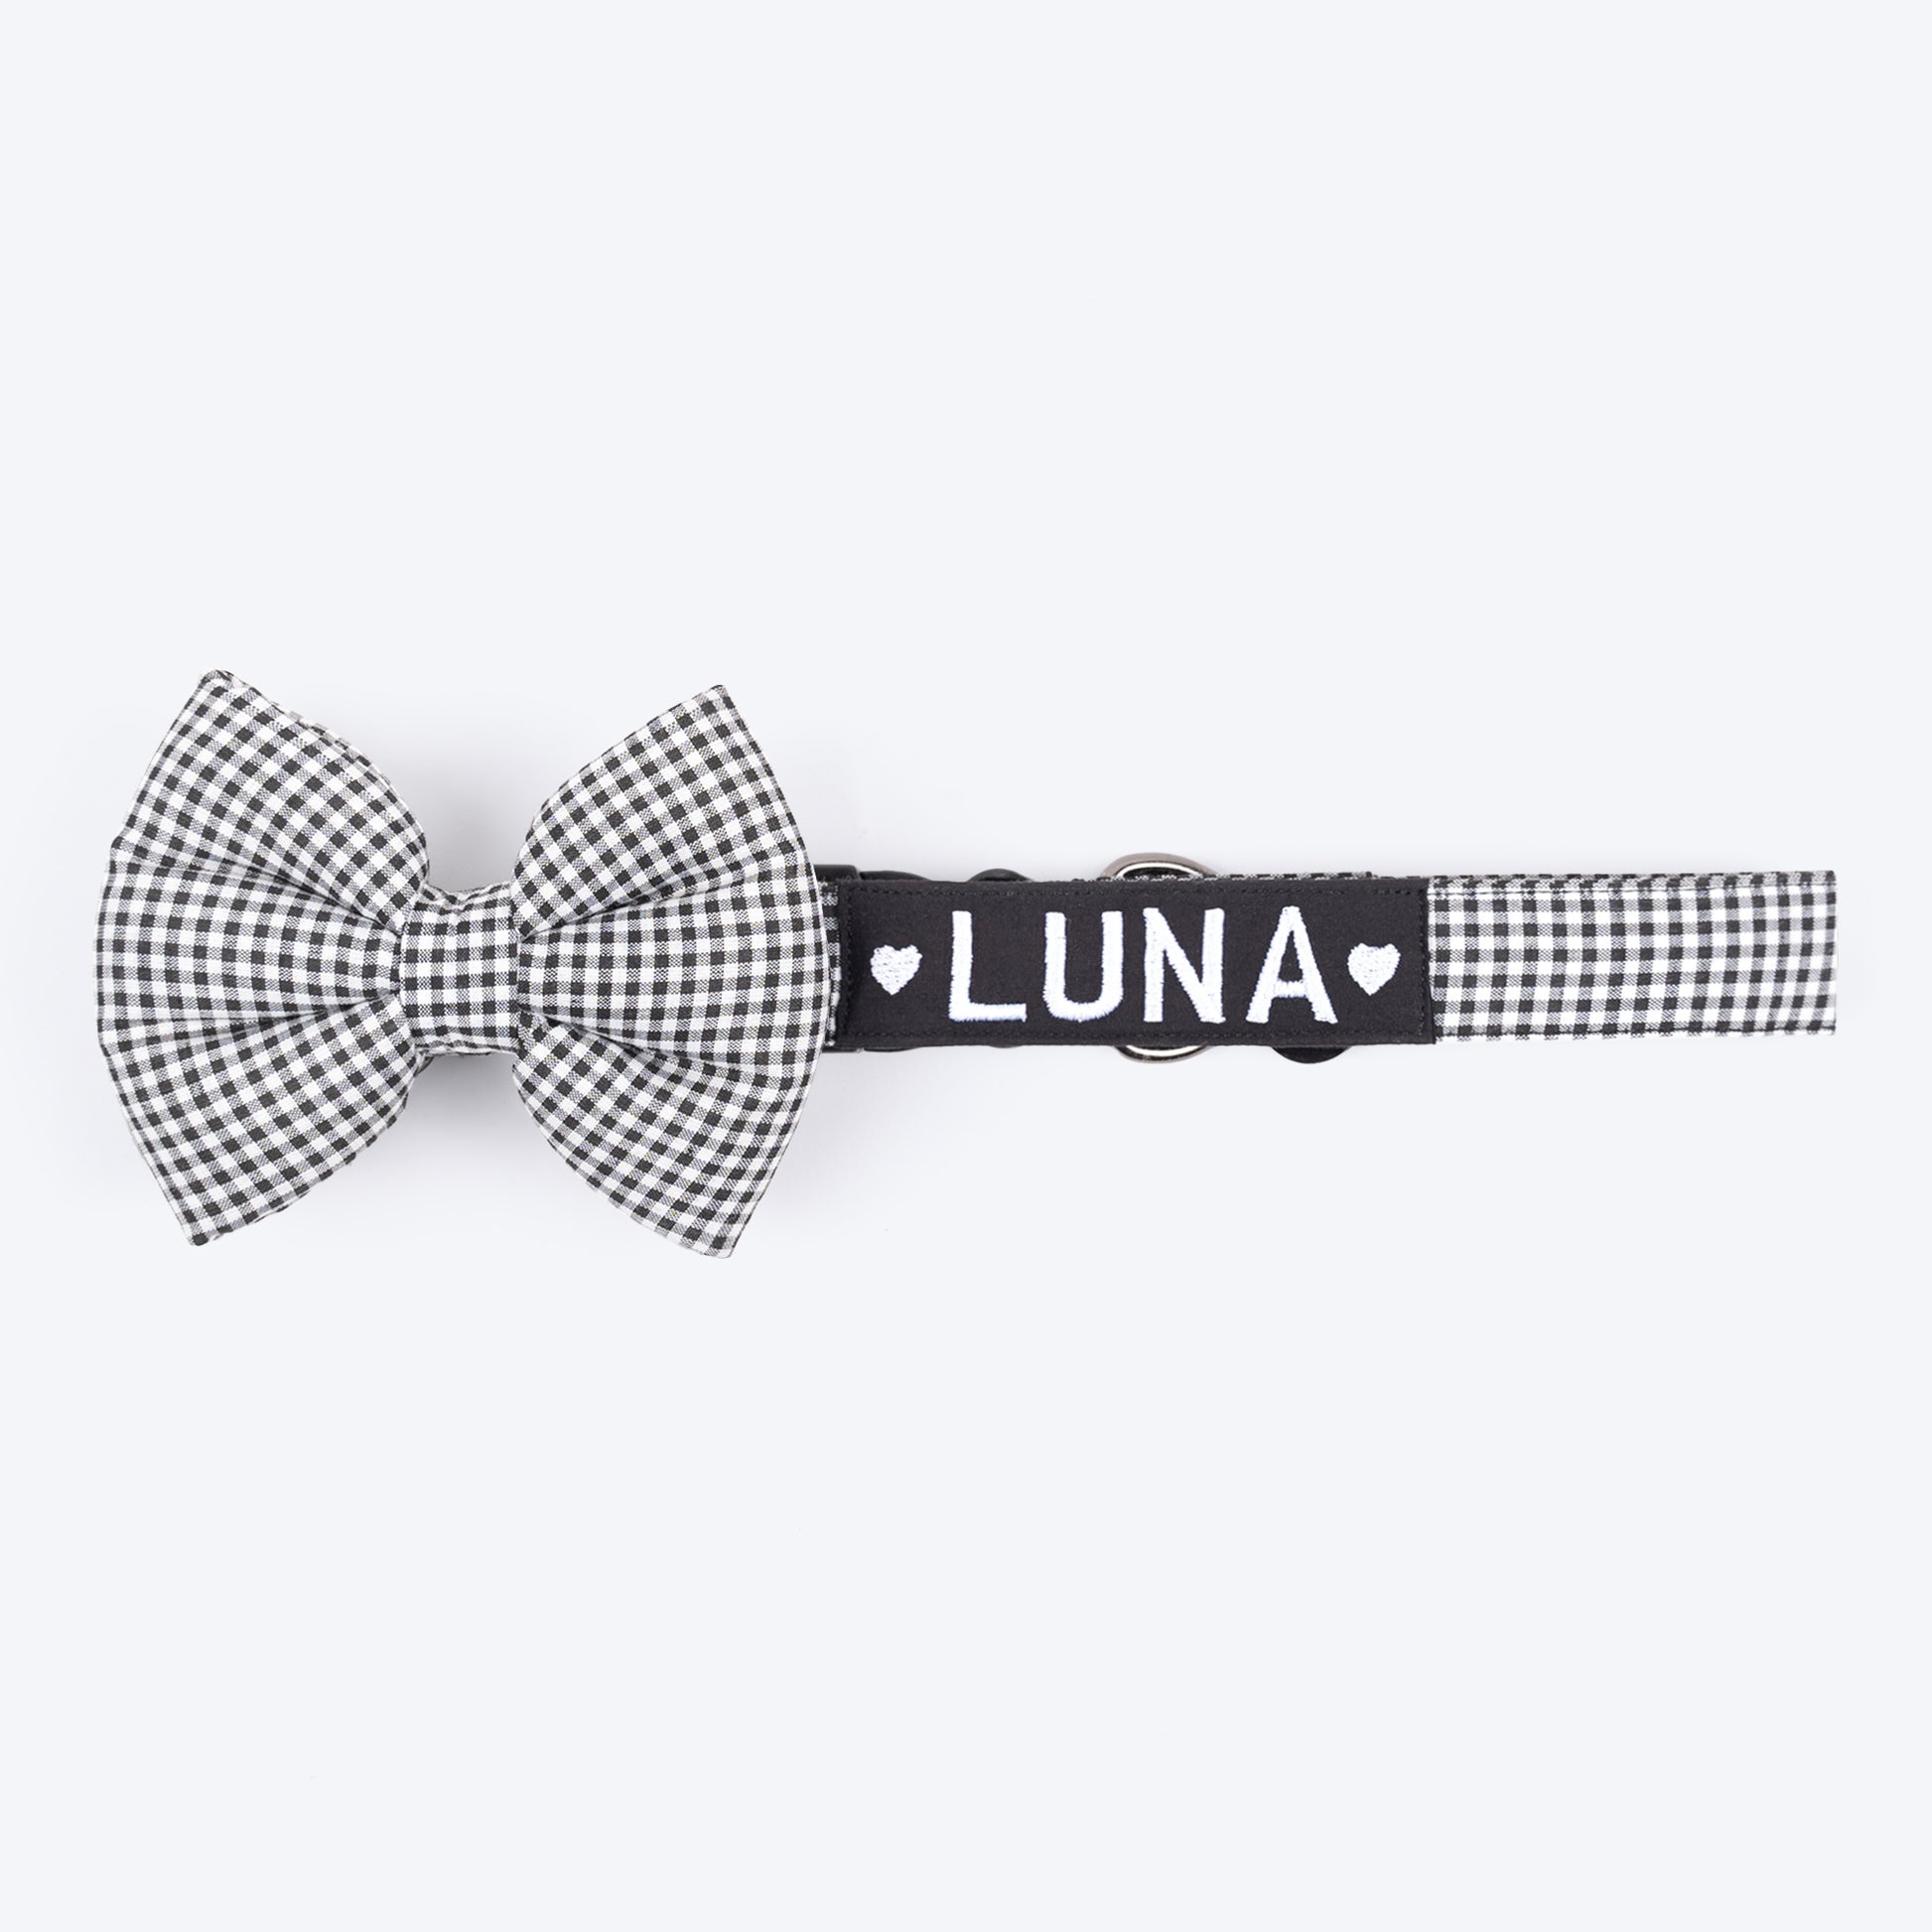 HUFT Personalised Gingham Fabric Collar With Bow Tie For Dogs - Black - Heads Up For Tails